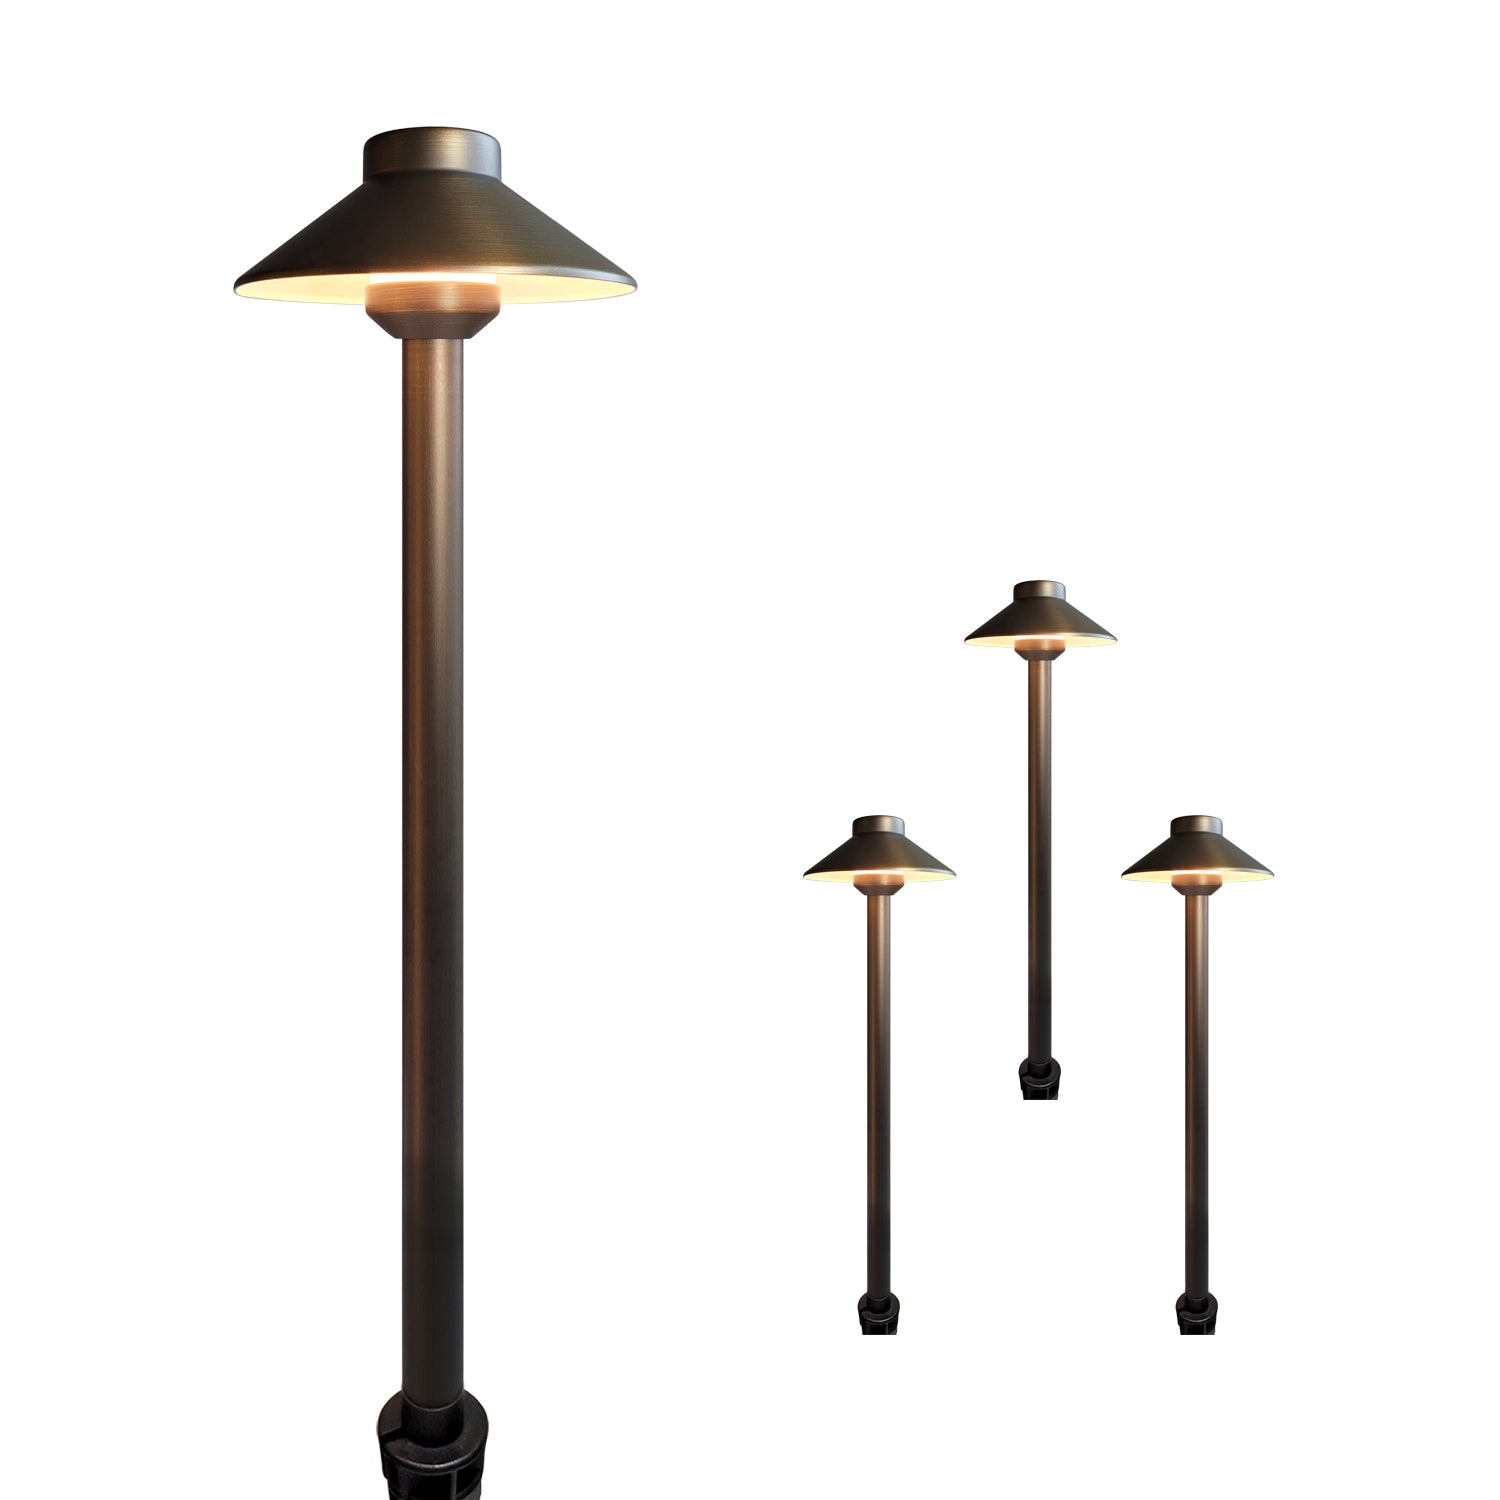 12V low voltage brass garden path lights and area lights COP602B. Durable, energy-efficient LED fixtures perfect for illuminating walkways and garden areas.